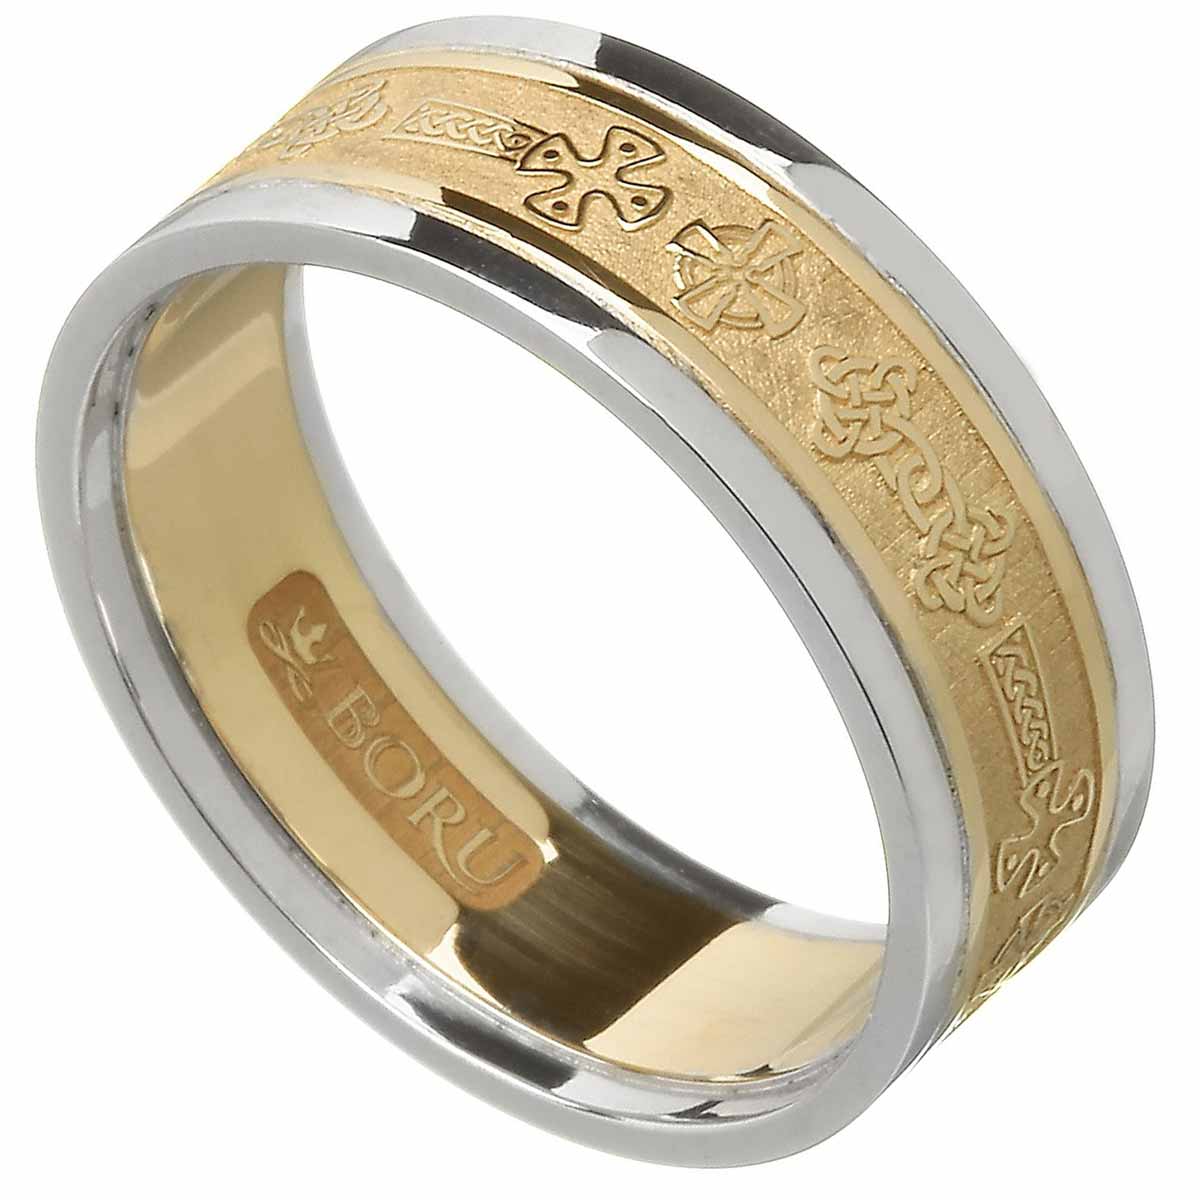 Product image for Celtic Ring - Ladies Yellow Gold with White Gold Trim Celtic Cross Wedding Ring